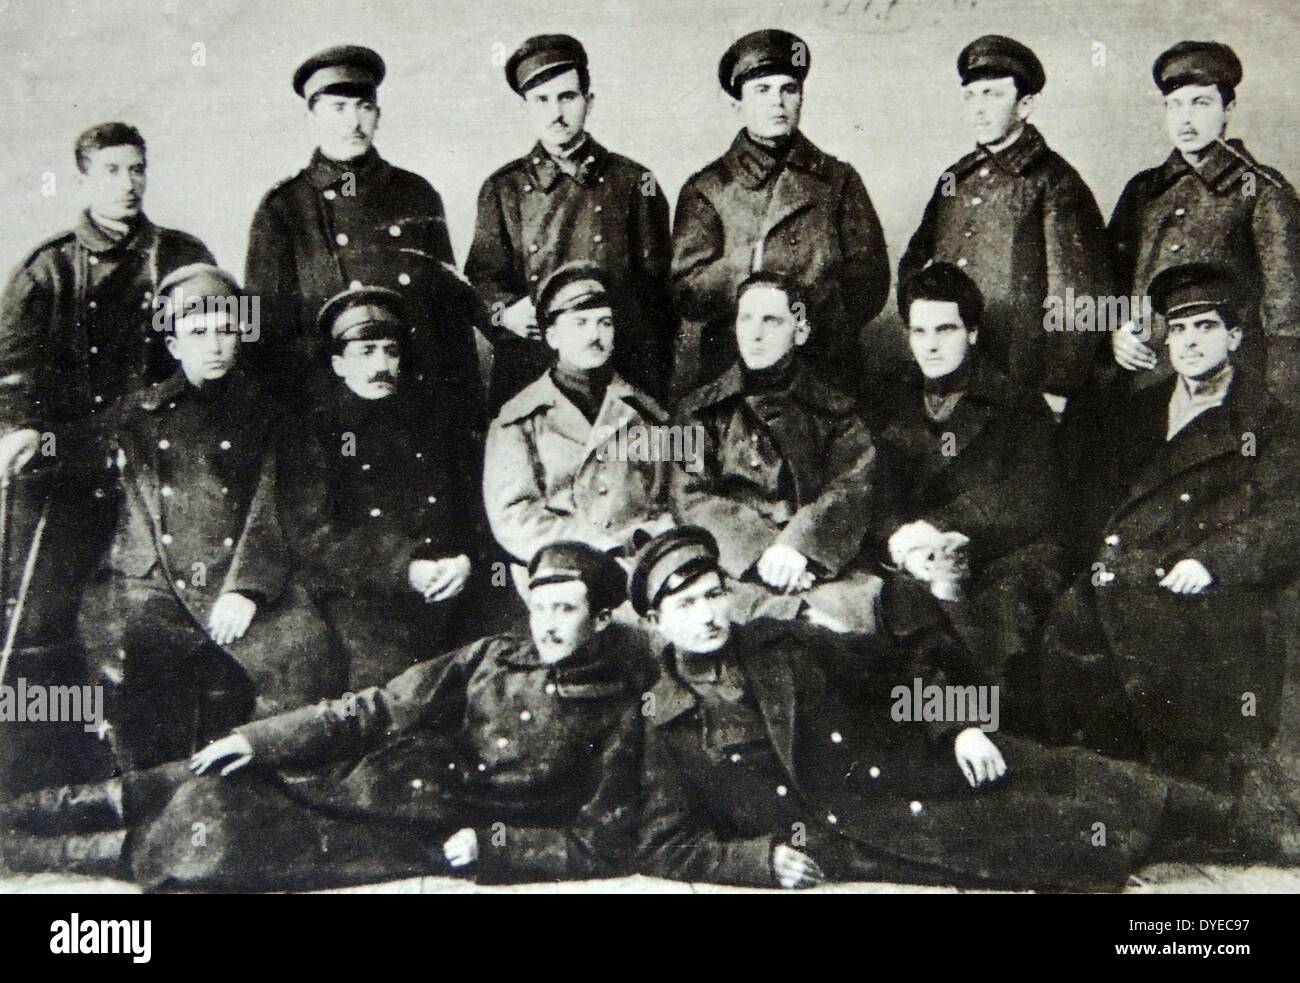 The Red Army was made up of the son of the Bulgarian working people who fought heroically for the cause of the Great October Socialist Revolution was seen. Dated 1917 Stock Photo